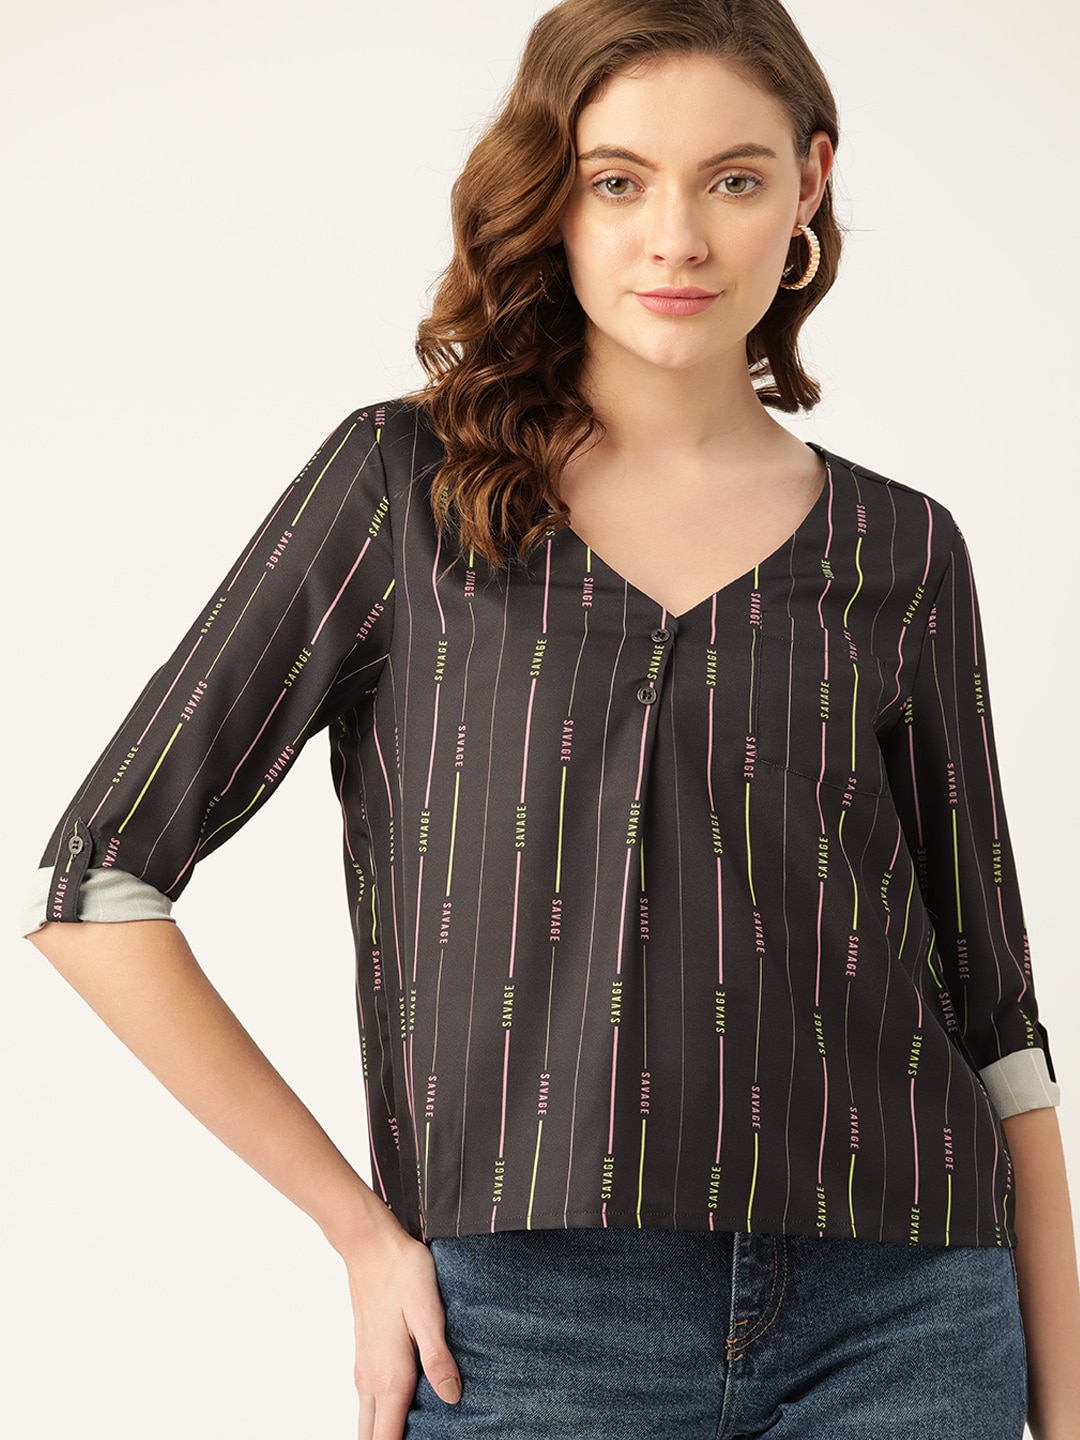 DressBerry Brown & Off White Striped Roll-Up Sleeves Regular Top